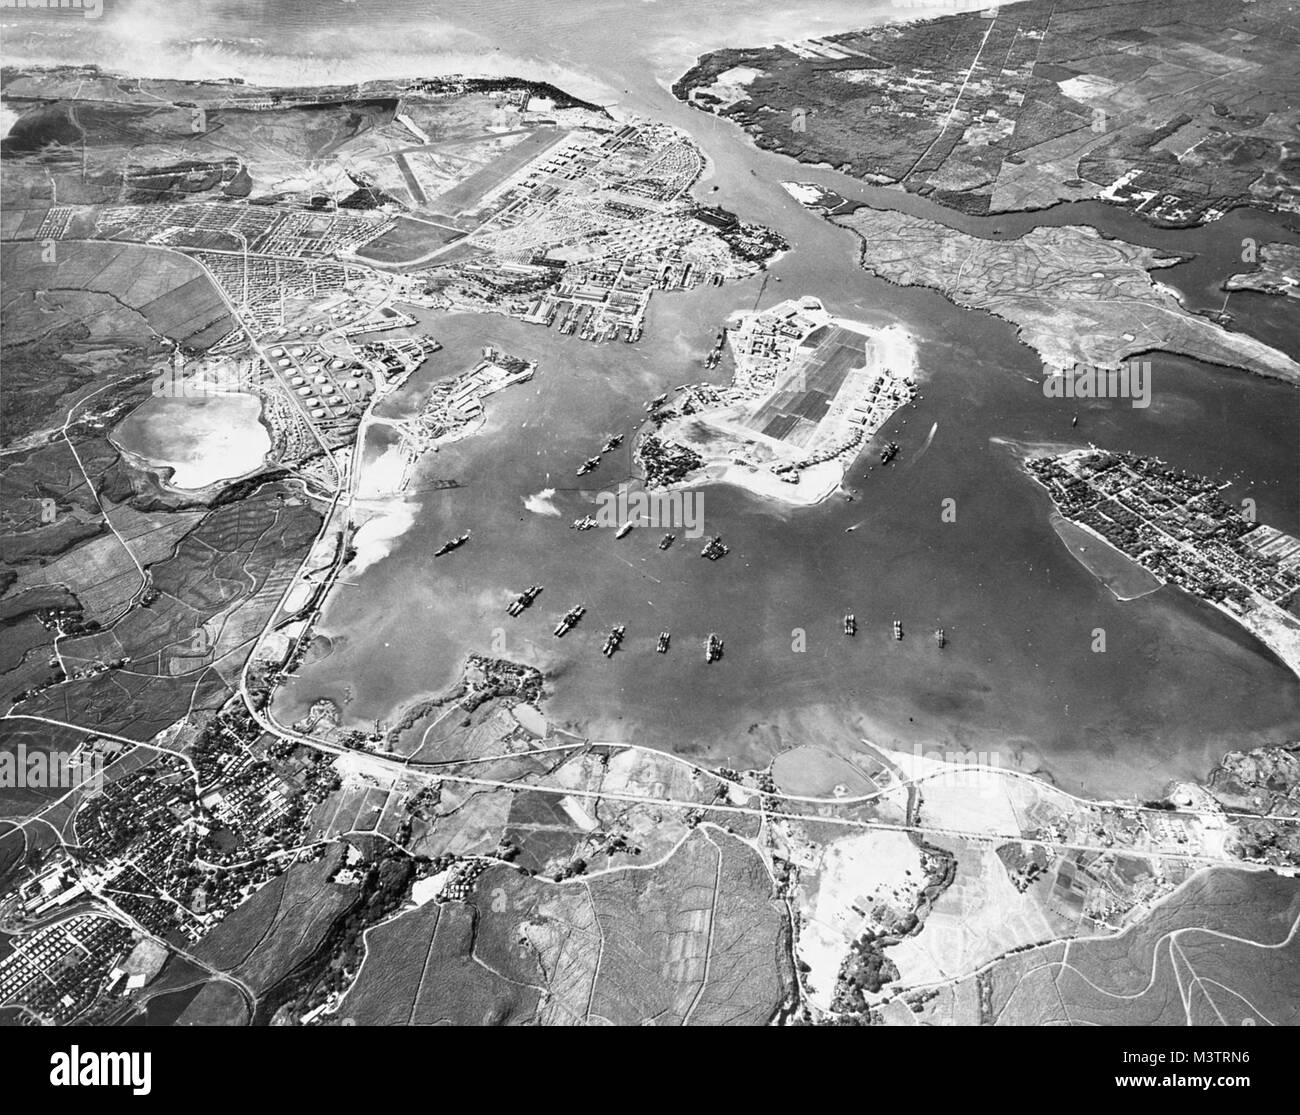 Aerial view of the U.S. Naval Operating Base, Pearl Harbor, Oahu, Hawaii (USA), looking southwest on 30 October 1941. Ford Island Naval Air Station is in the center, with the Pearl Harbor Navy Yard just beyond it, across the channel. The airfield in the upper left-center is the U.S. Army's Hickam Field. Pearl Harbor looking southwest-Oct41 by AirmanMagazine Stock Photo